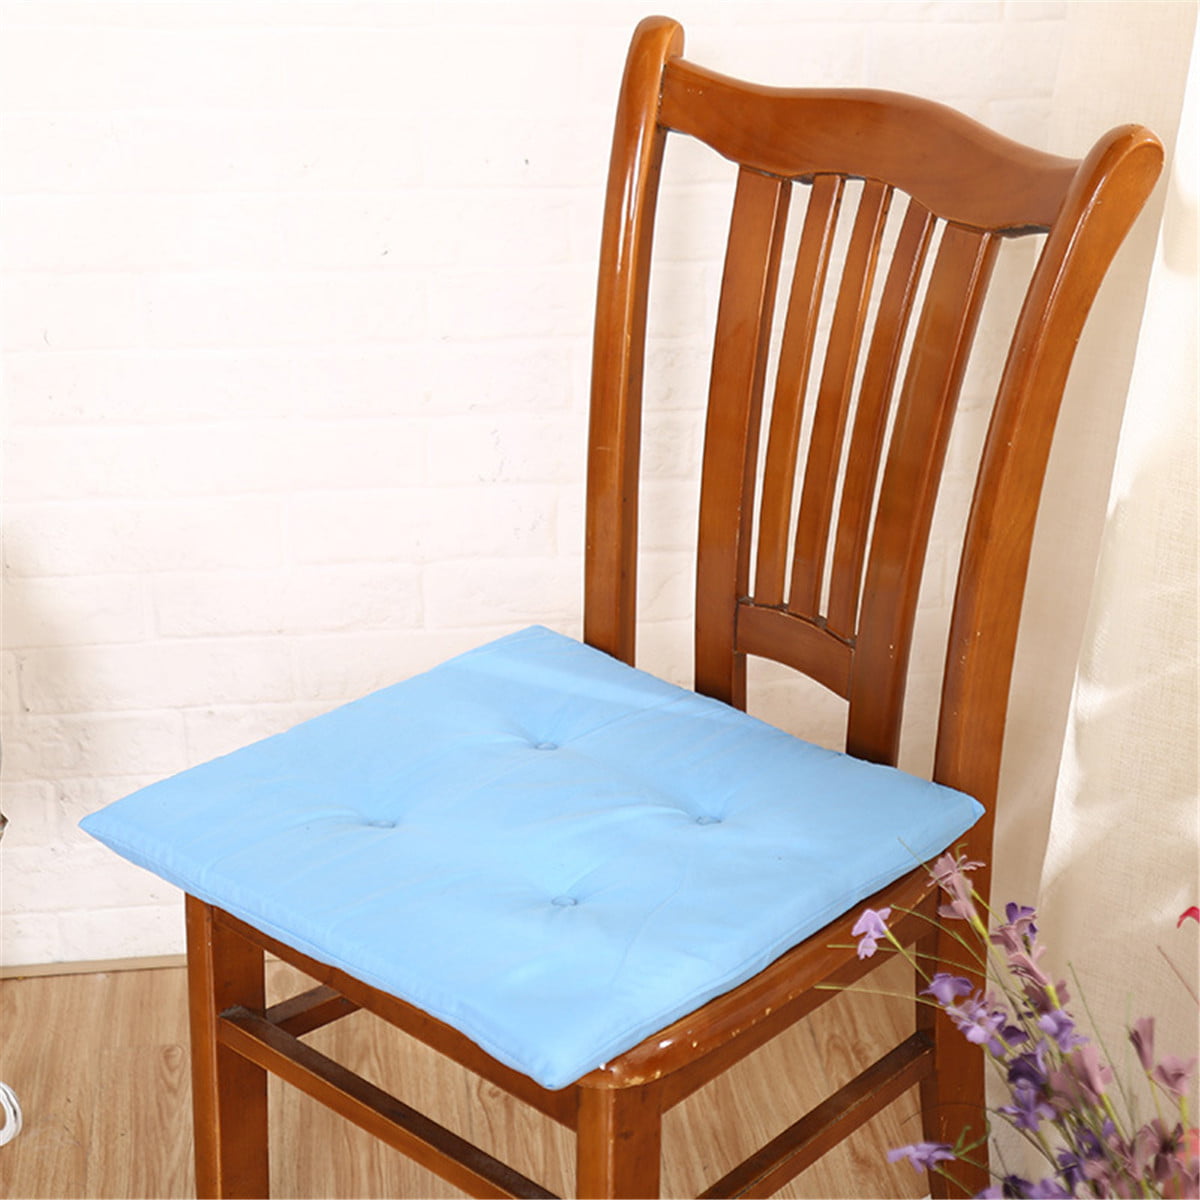 38X38cm Set of 2 Chairs Cushions with Tie Comfortable Non-slip Dining Chair Square Seat Pads Breathable Polyester & Easy to Clean for Home Kitchen Dining Room Office Brown